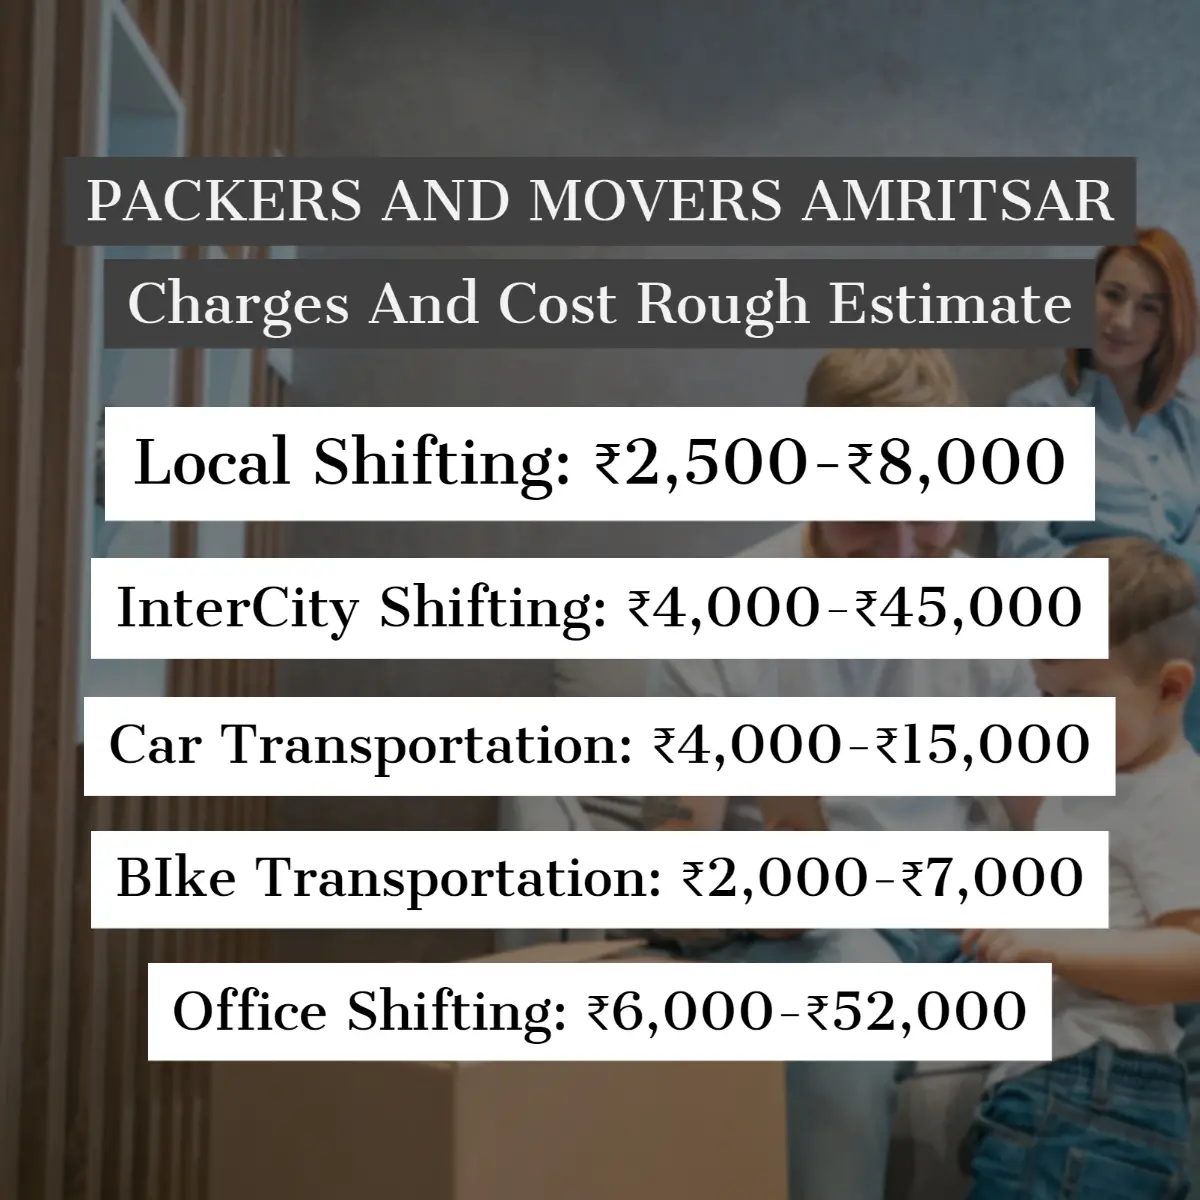 Packers and Movers Amritsar Charges